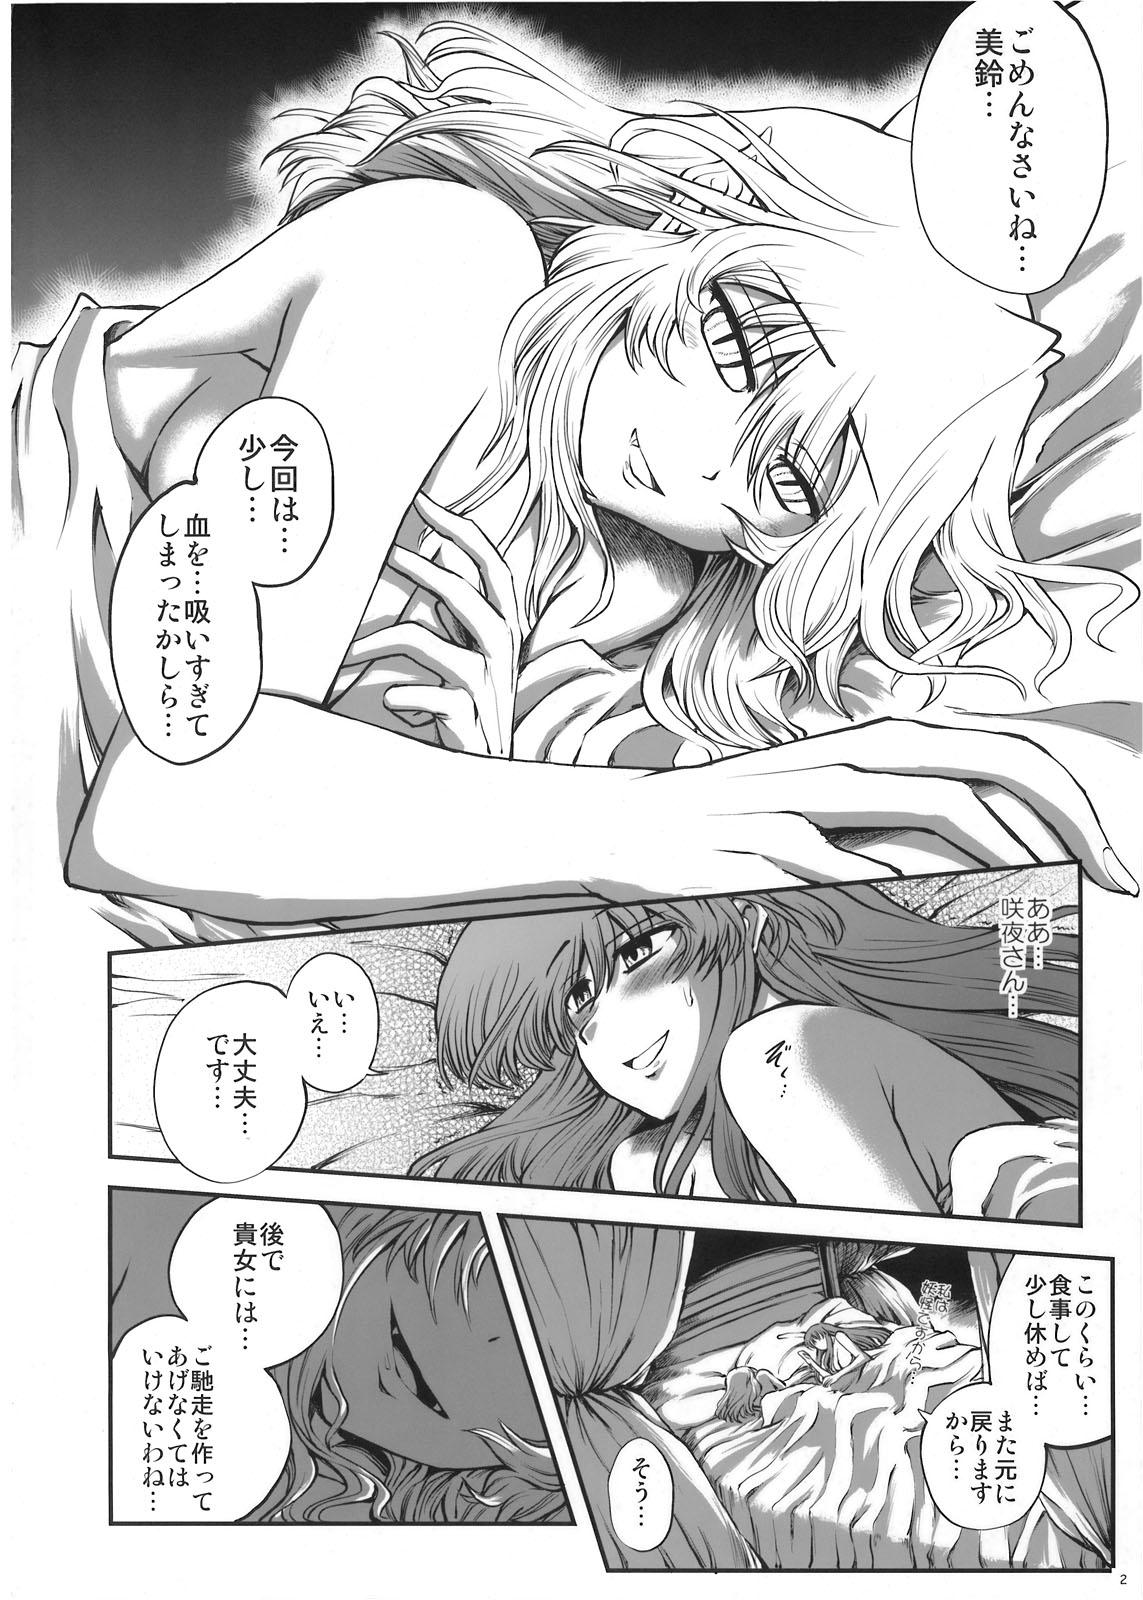 Anal Sex Luna Dial Maid to Chi no Unmei dokei Lunatic+alpha - Touhou project Hermana - Page 3